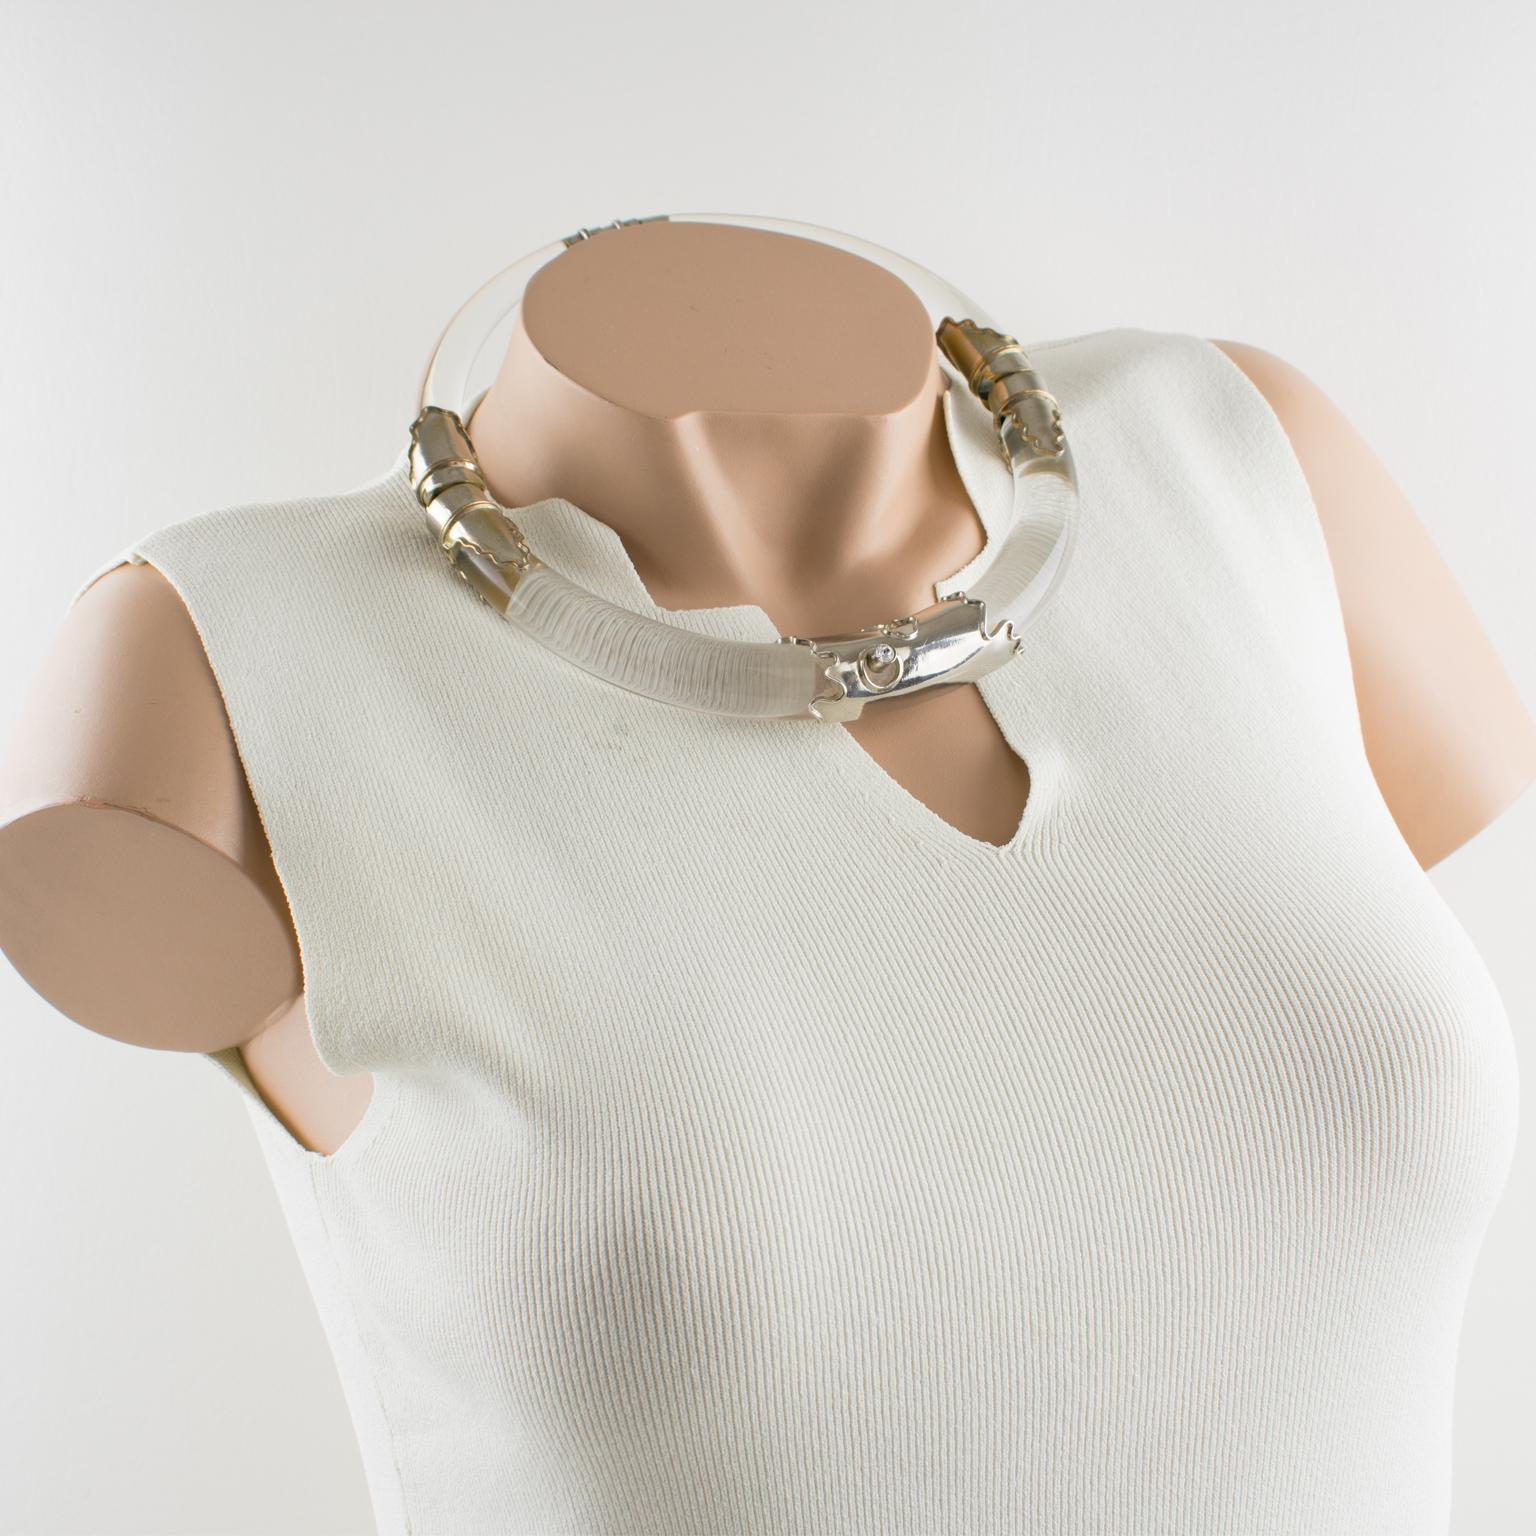 Gorgeous sculptural Lucite choker necklace by an artisan designer studio in Italy. Massive rigid collar necklace fully articulated. Futuristic silvered metal embellishments wrap around the clear Lucite band and are ornate with one crystal clear